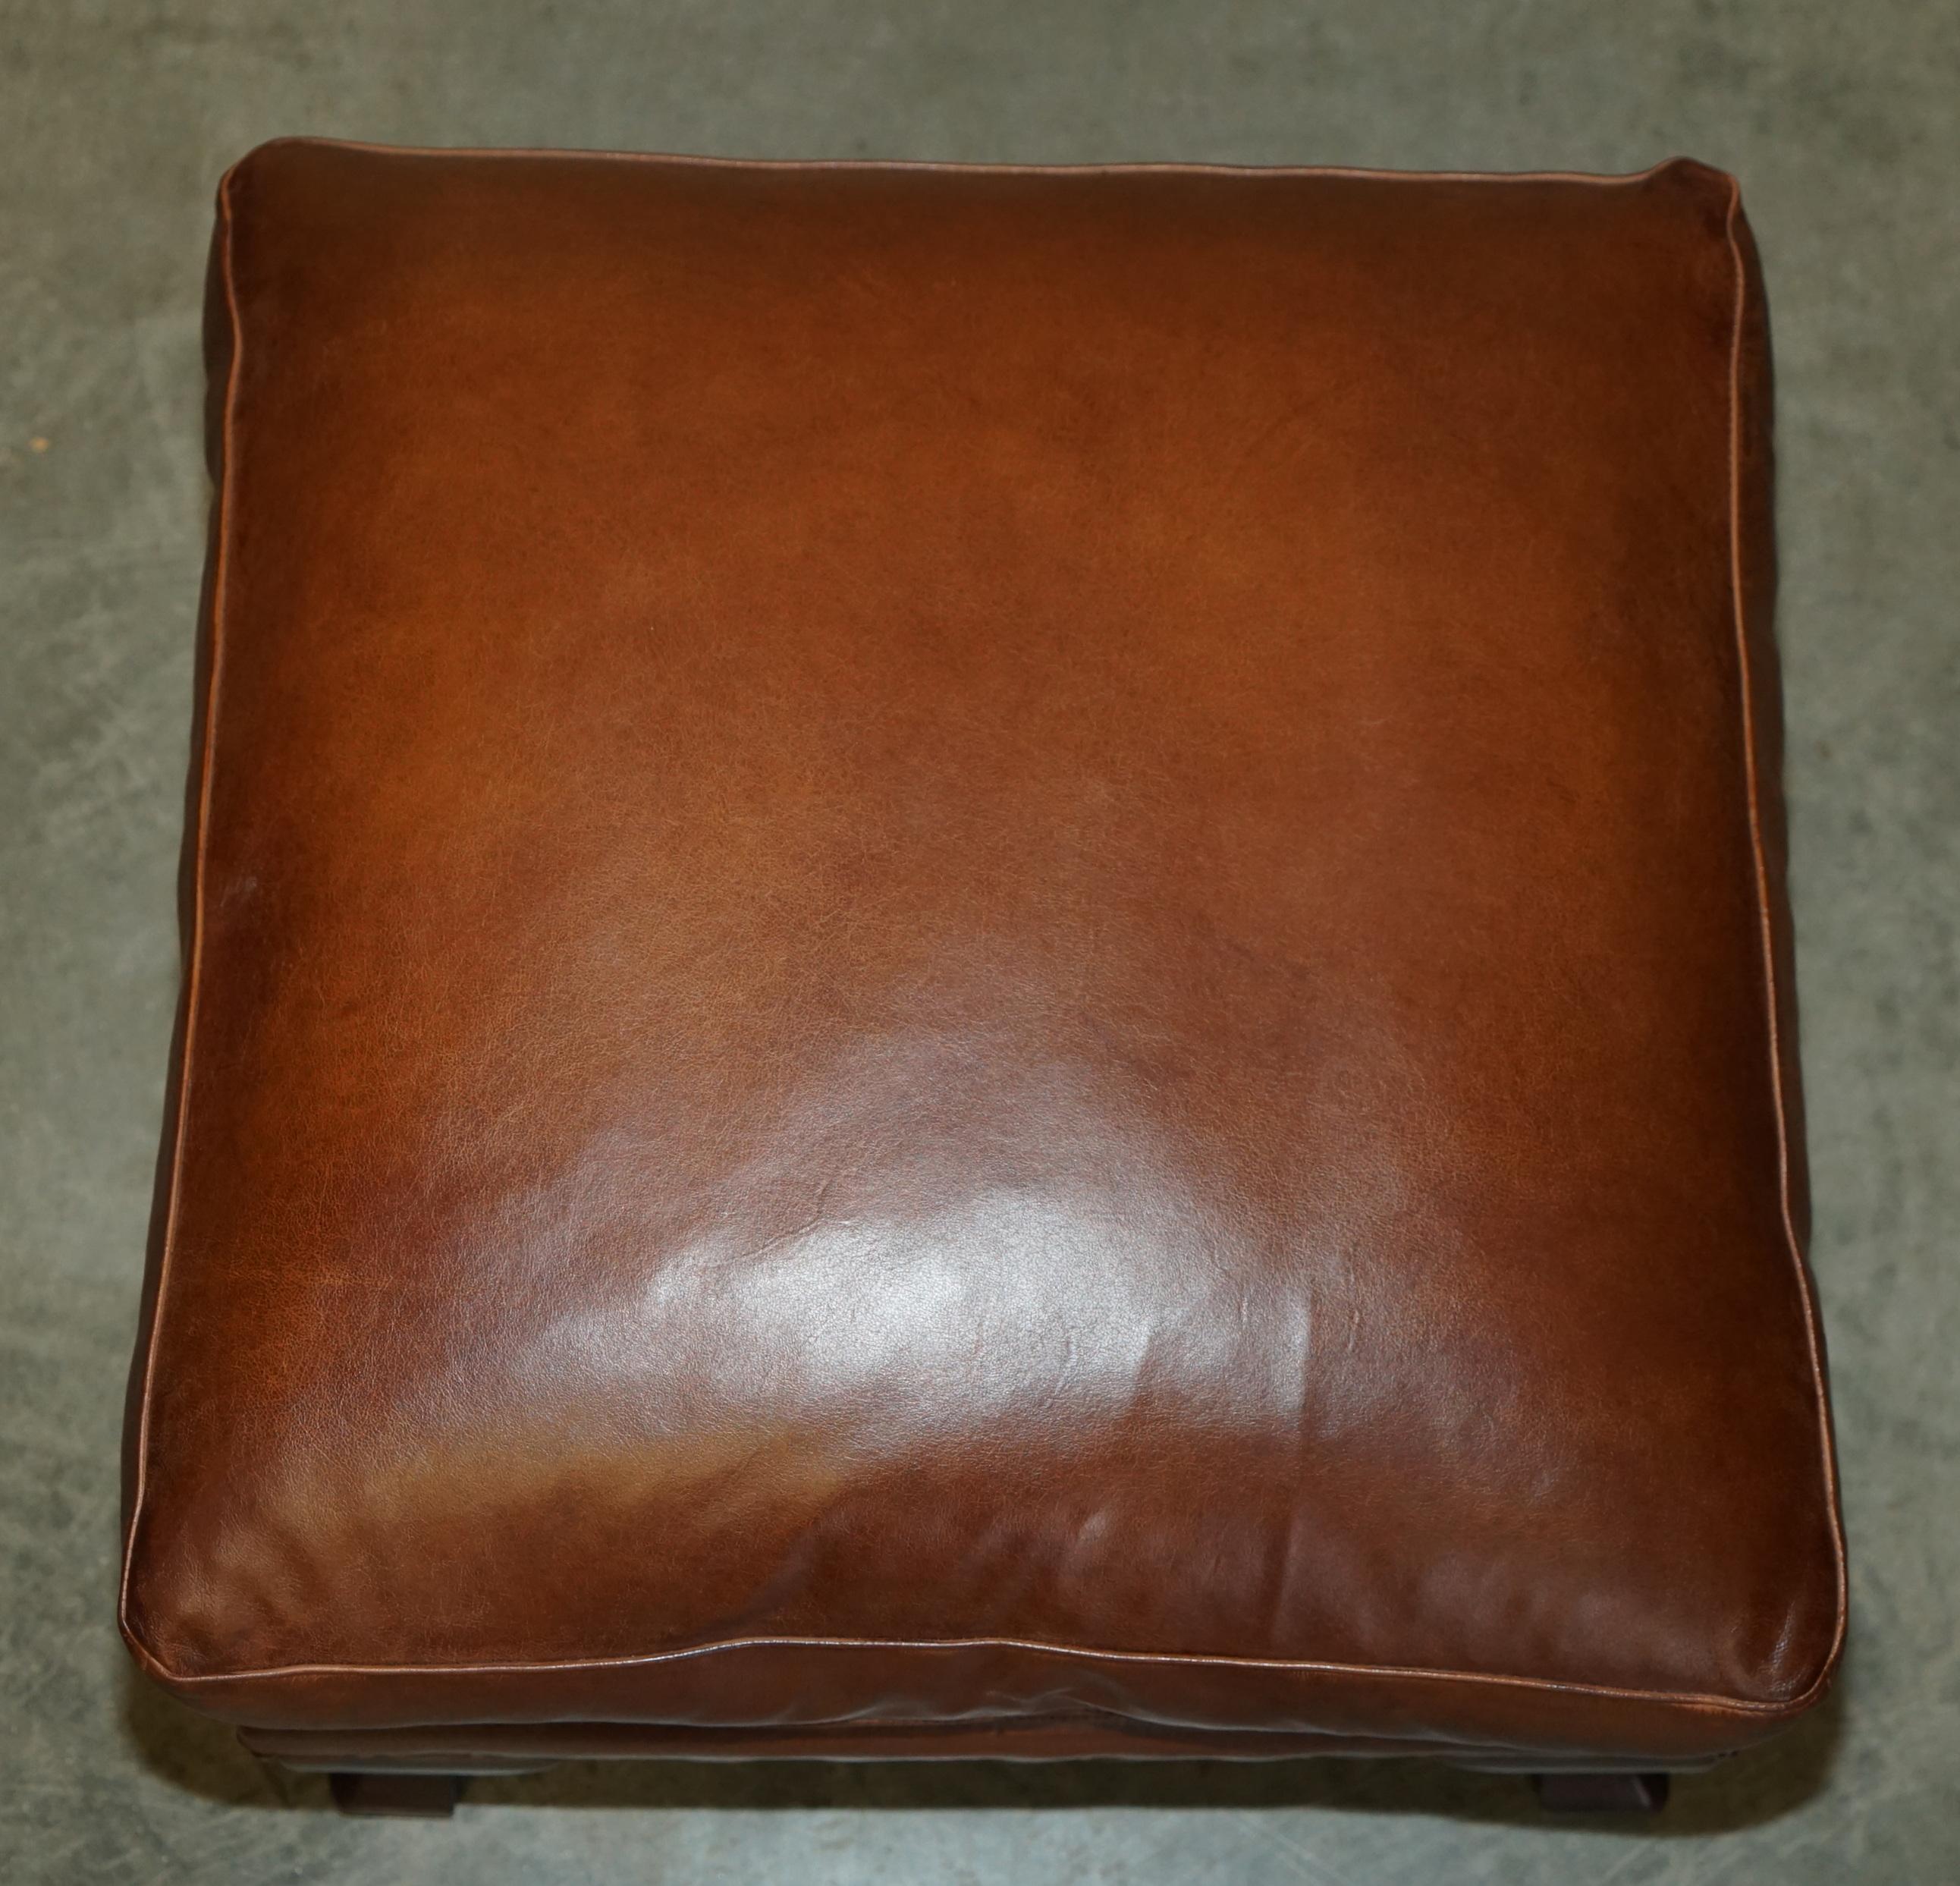 TETRAD BROWN LEATHER LARGE FOOTSTOOL LARGE ENoUGH FOR TWO PEOPLE TO SHARE (Englisch) im Angebot